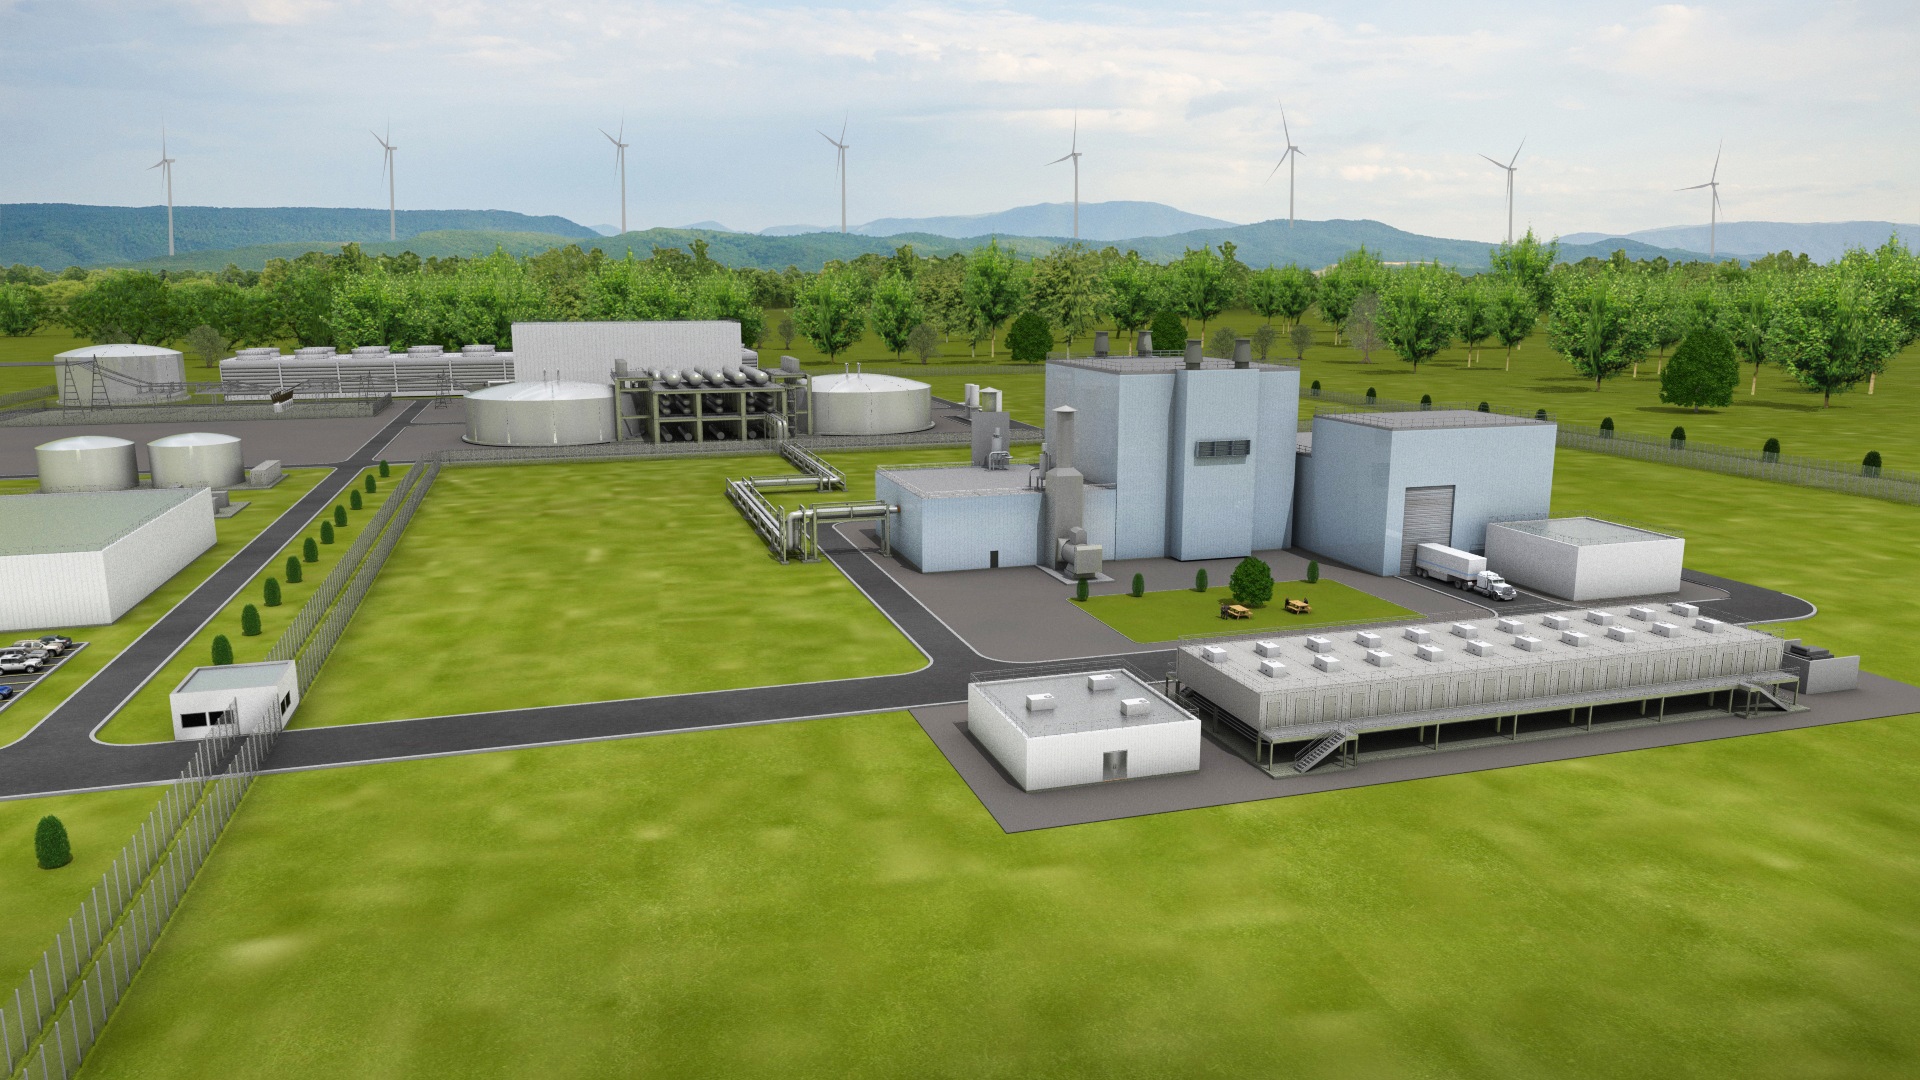 TerraPower chooses Bechtel as engineering, construction partner for Natrium™ reactor and energy system demonstration project